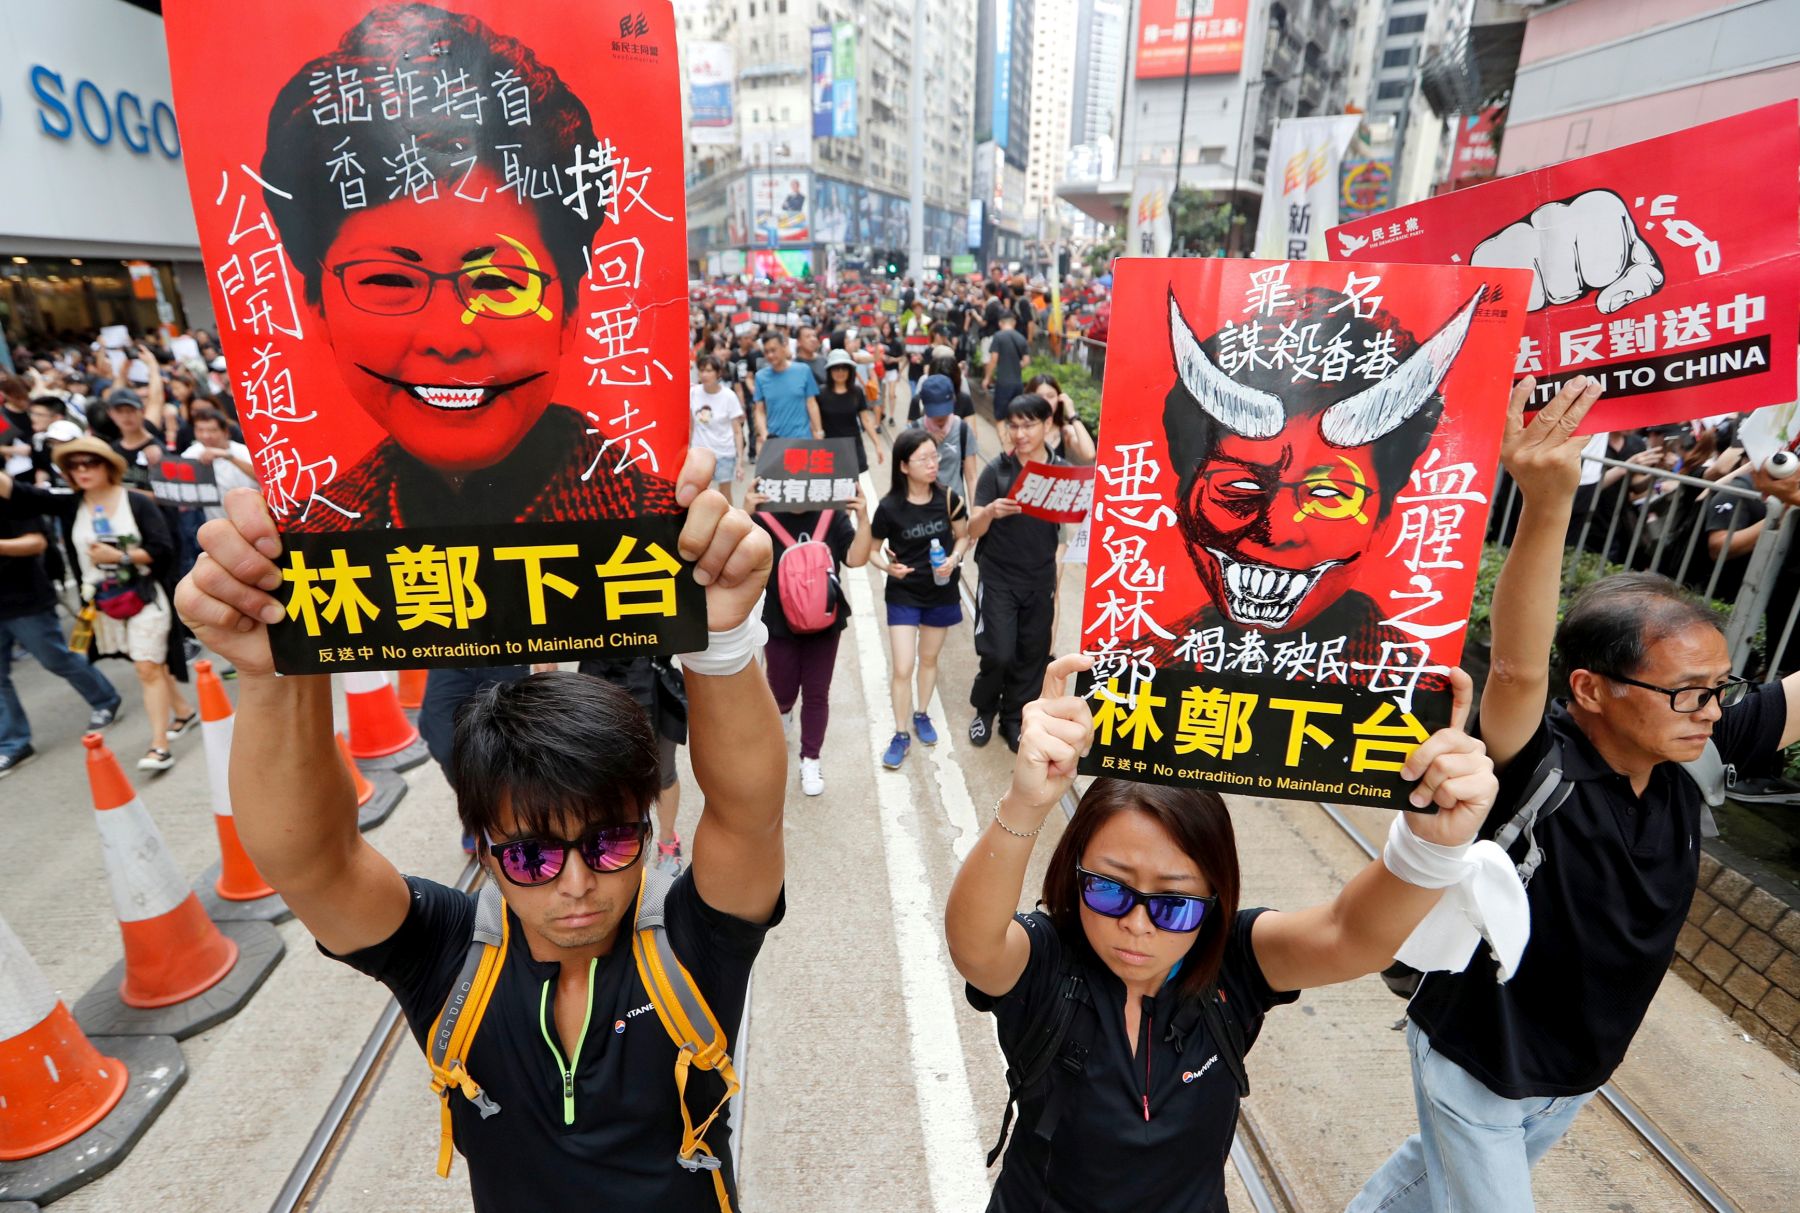 Demonstration demanding Hong Kong’s leaders to step down and withdraw the extradition bill, in Hong Kong